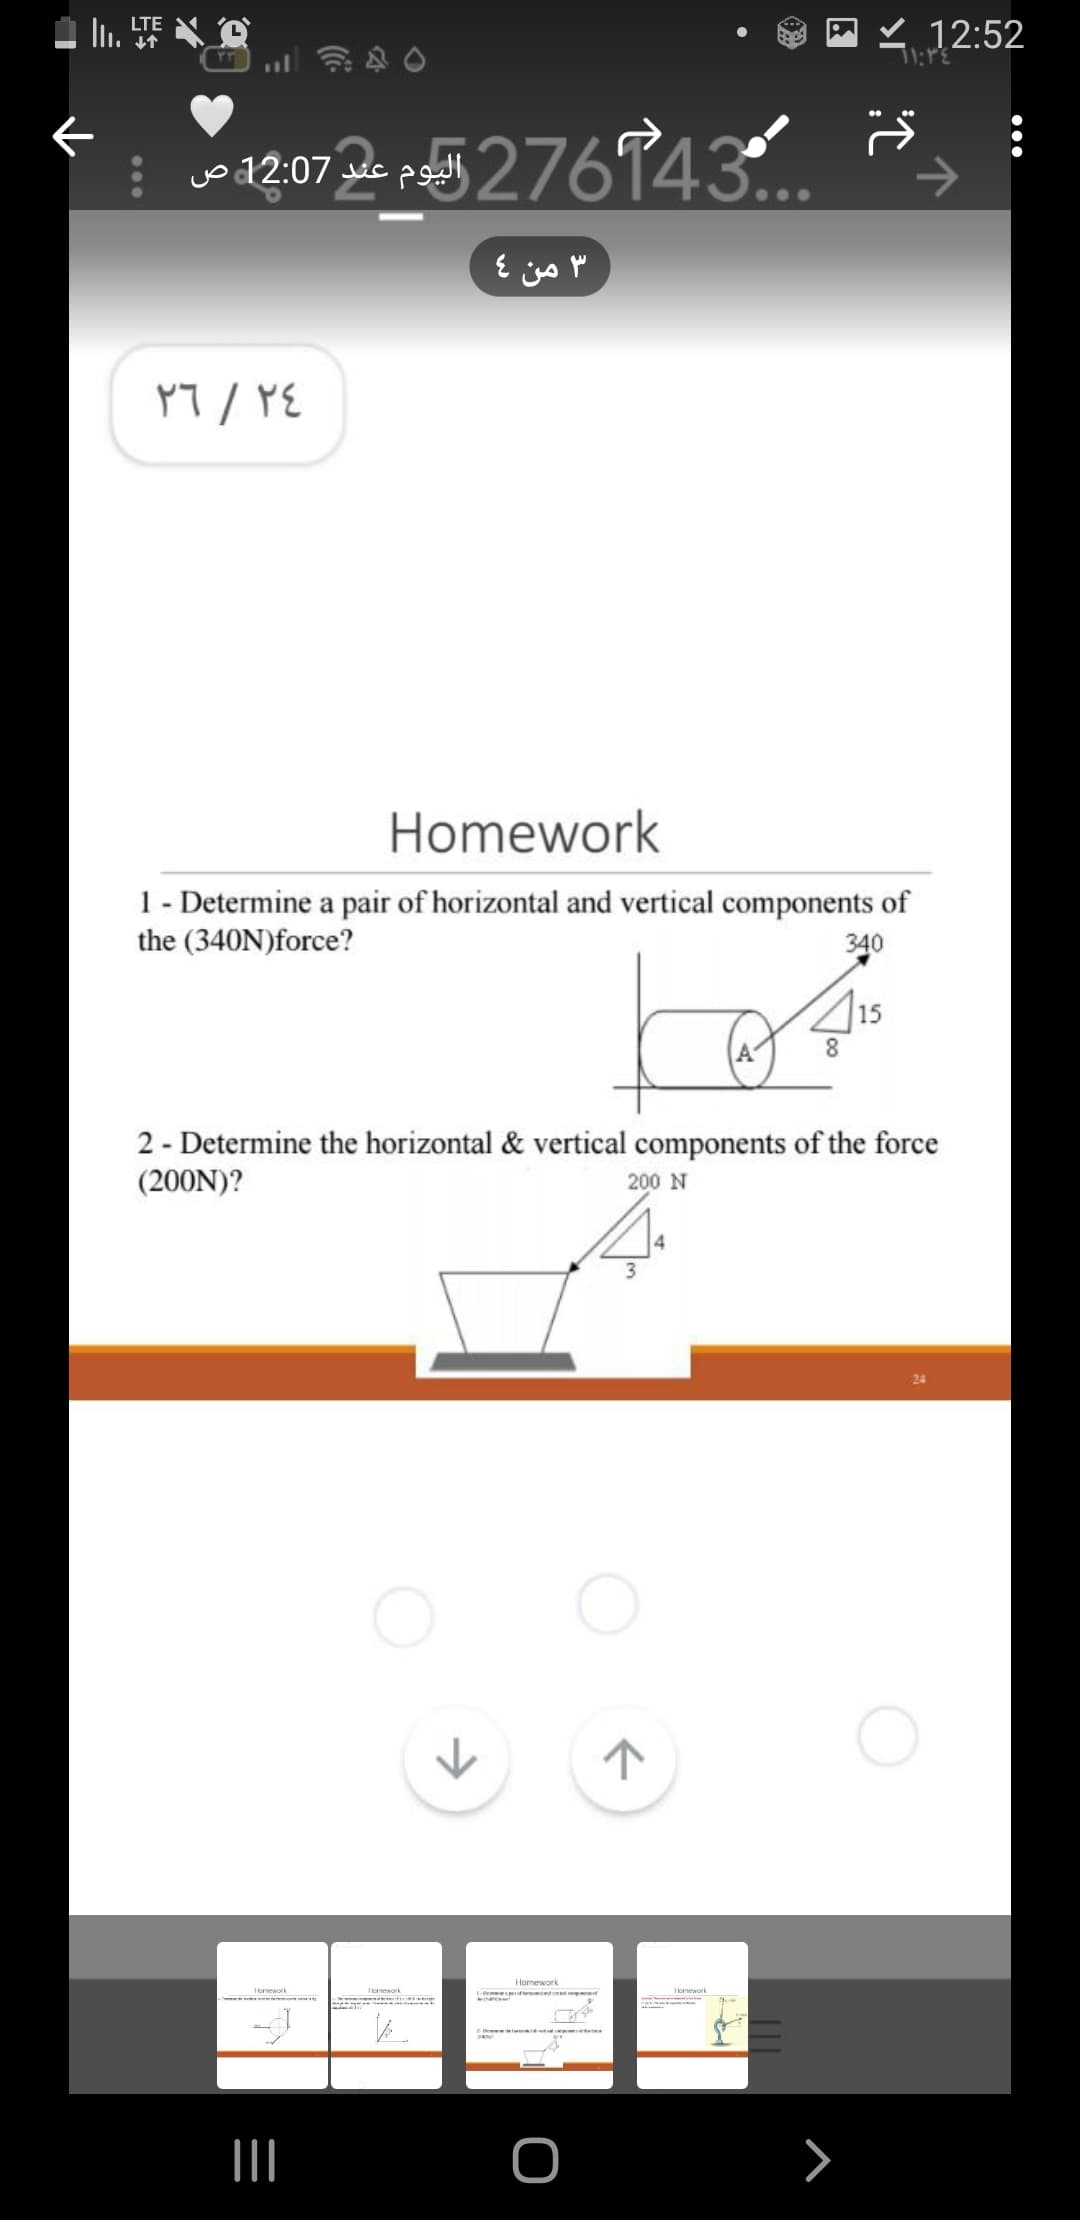 II.
←
LTE
۳۳
12:07 276743
عند ص
٢٤
/
٢٦
Homework
1 - Determine a pair of horizontal and vertical components of
the (340N) force?
340
Homework
L. Crema de modo
2 - Determine the horizontal & vertical components of the force
(200N)?
200 N
|||
3 من 4
Homework
K
Homework.
O
ㅈ
415
8
Homework
12:52